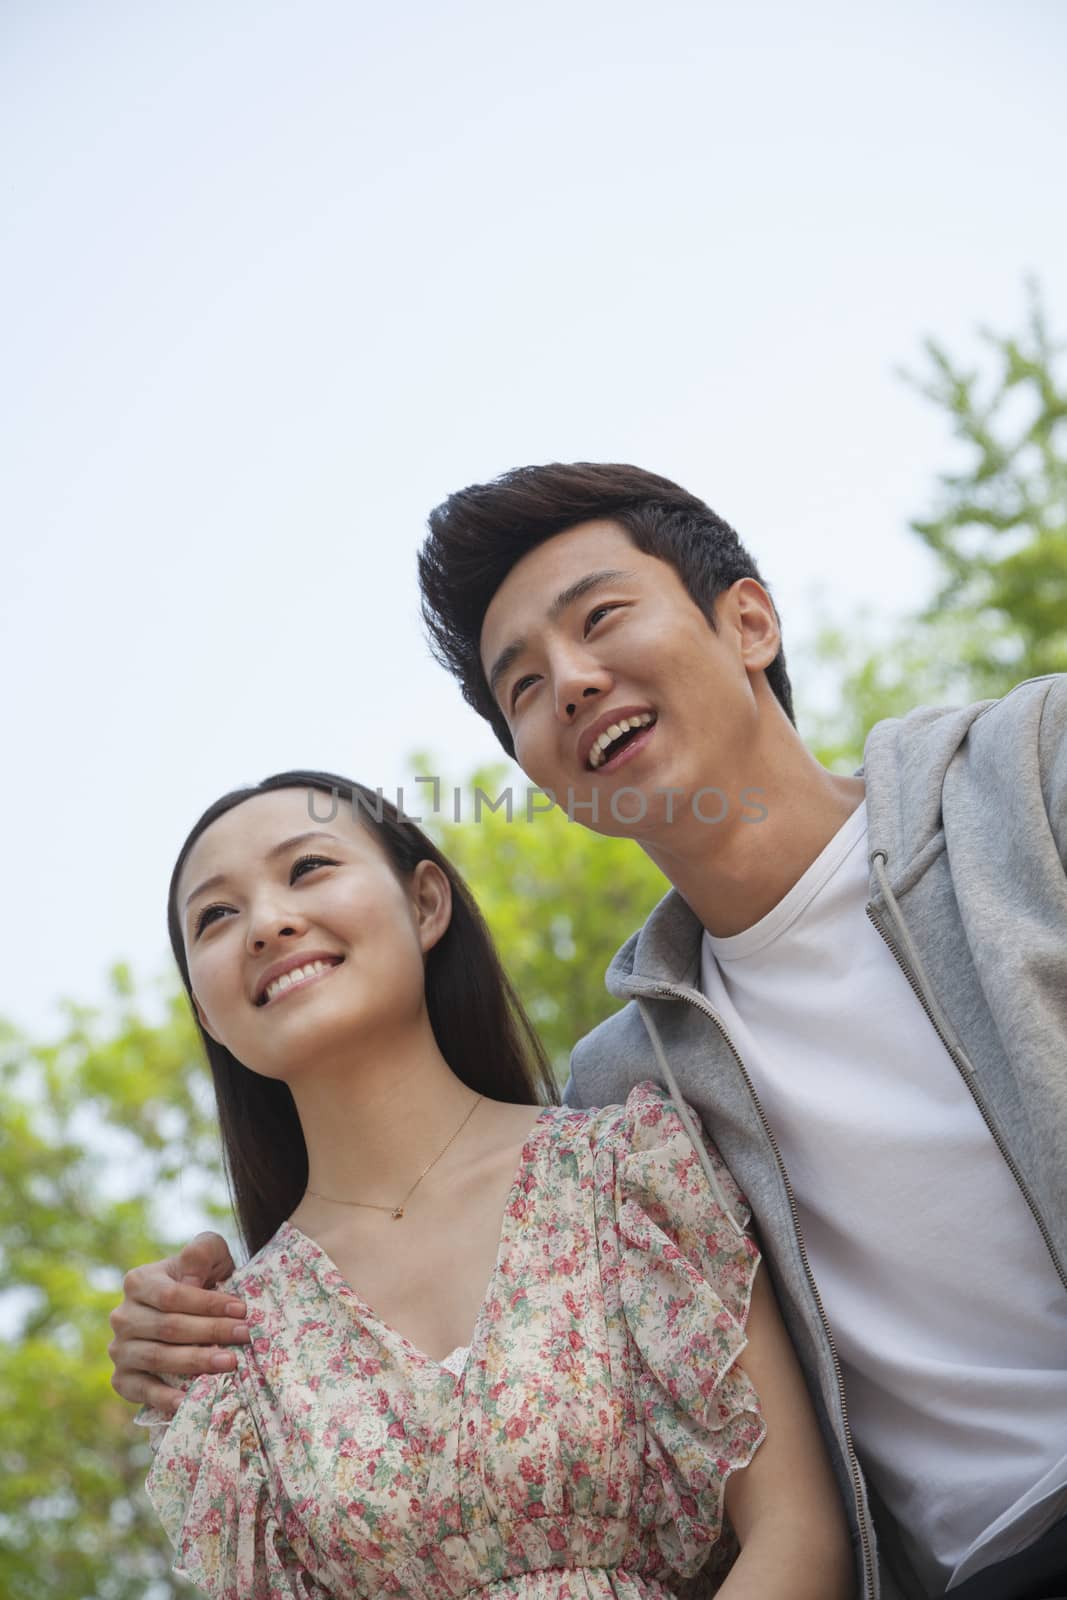 Smiling happy young couple with arm around the shoulders outdoors in a park, front view by XiXinXing